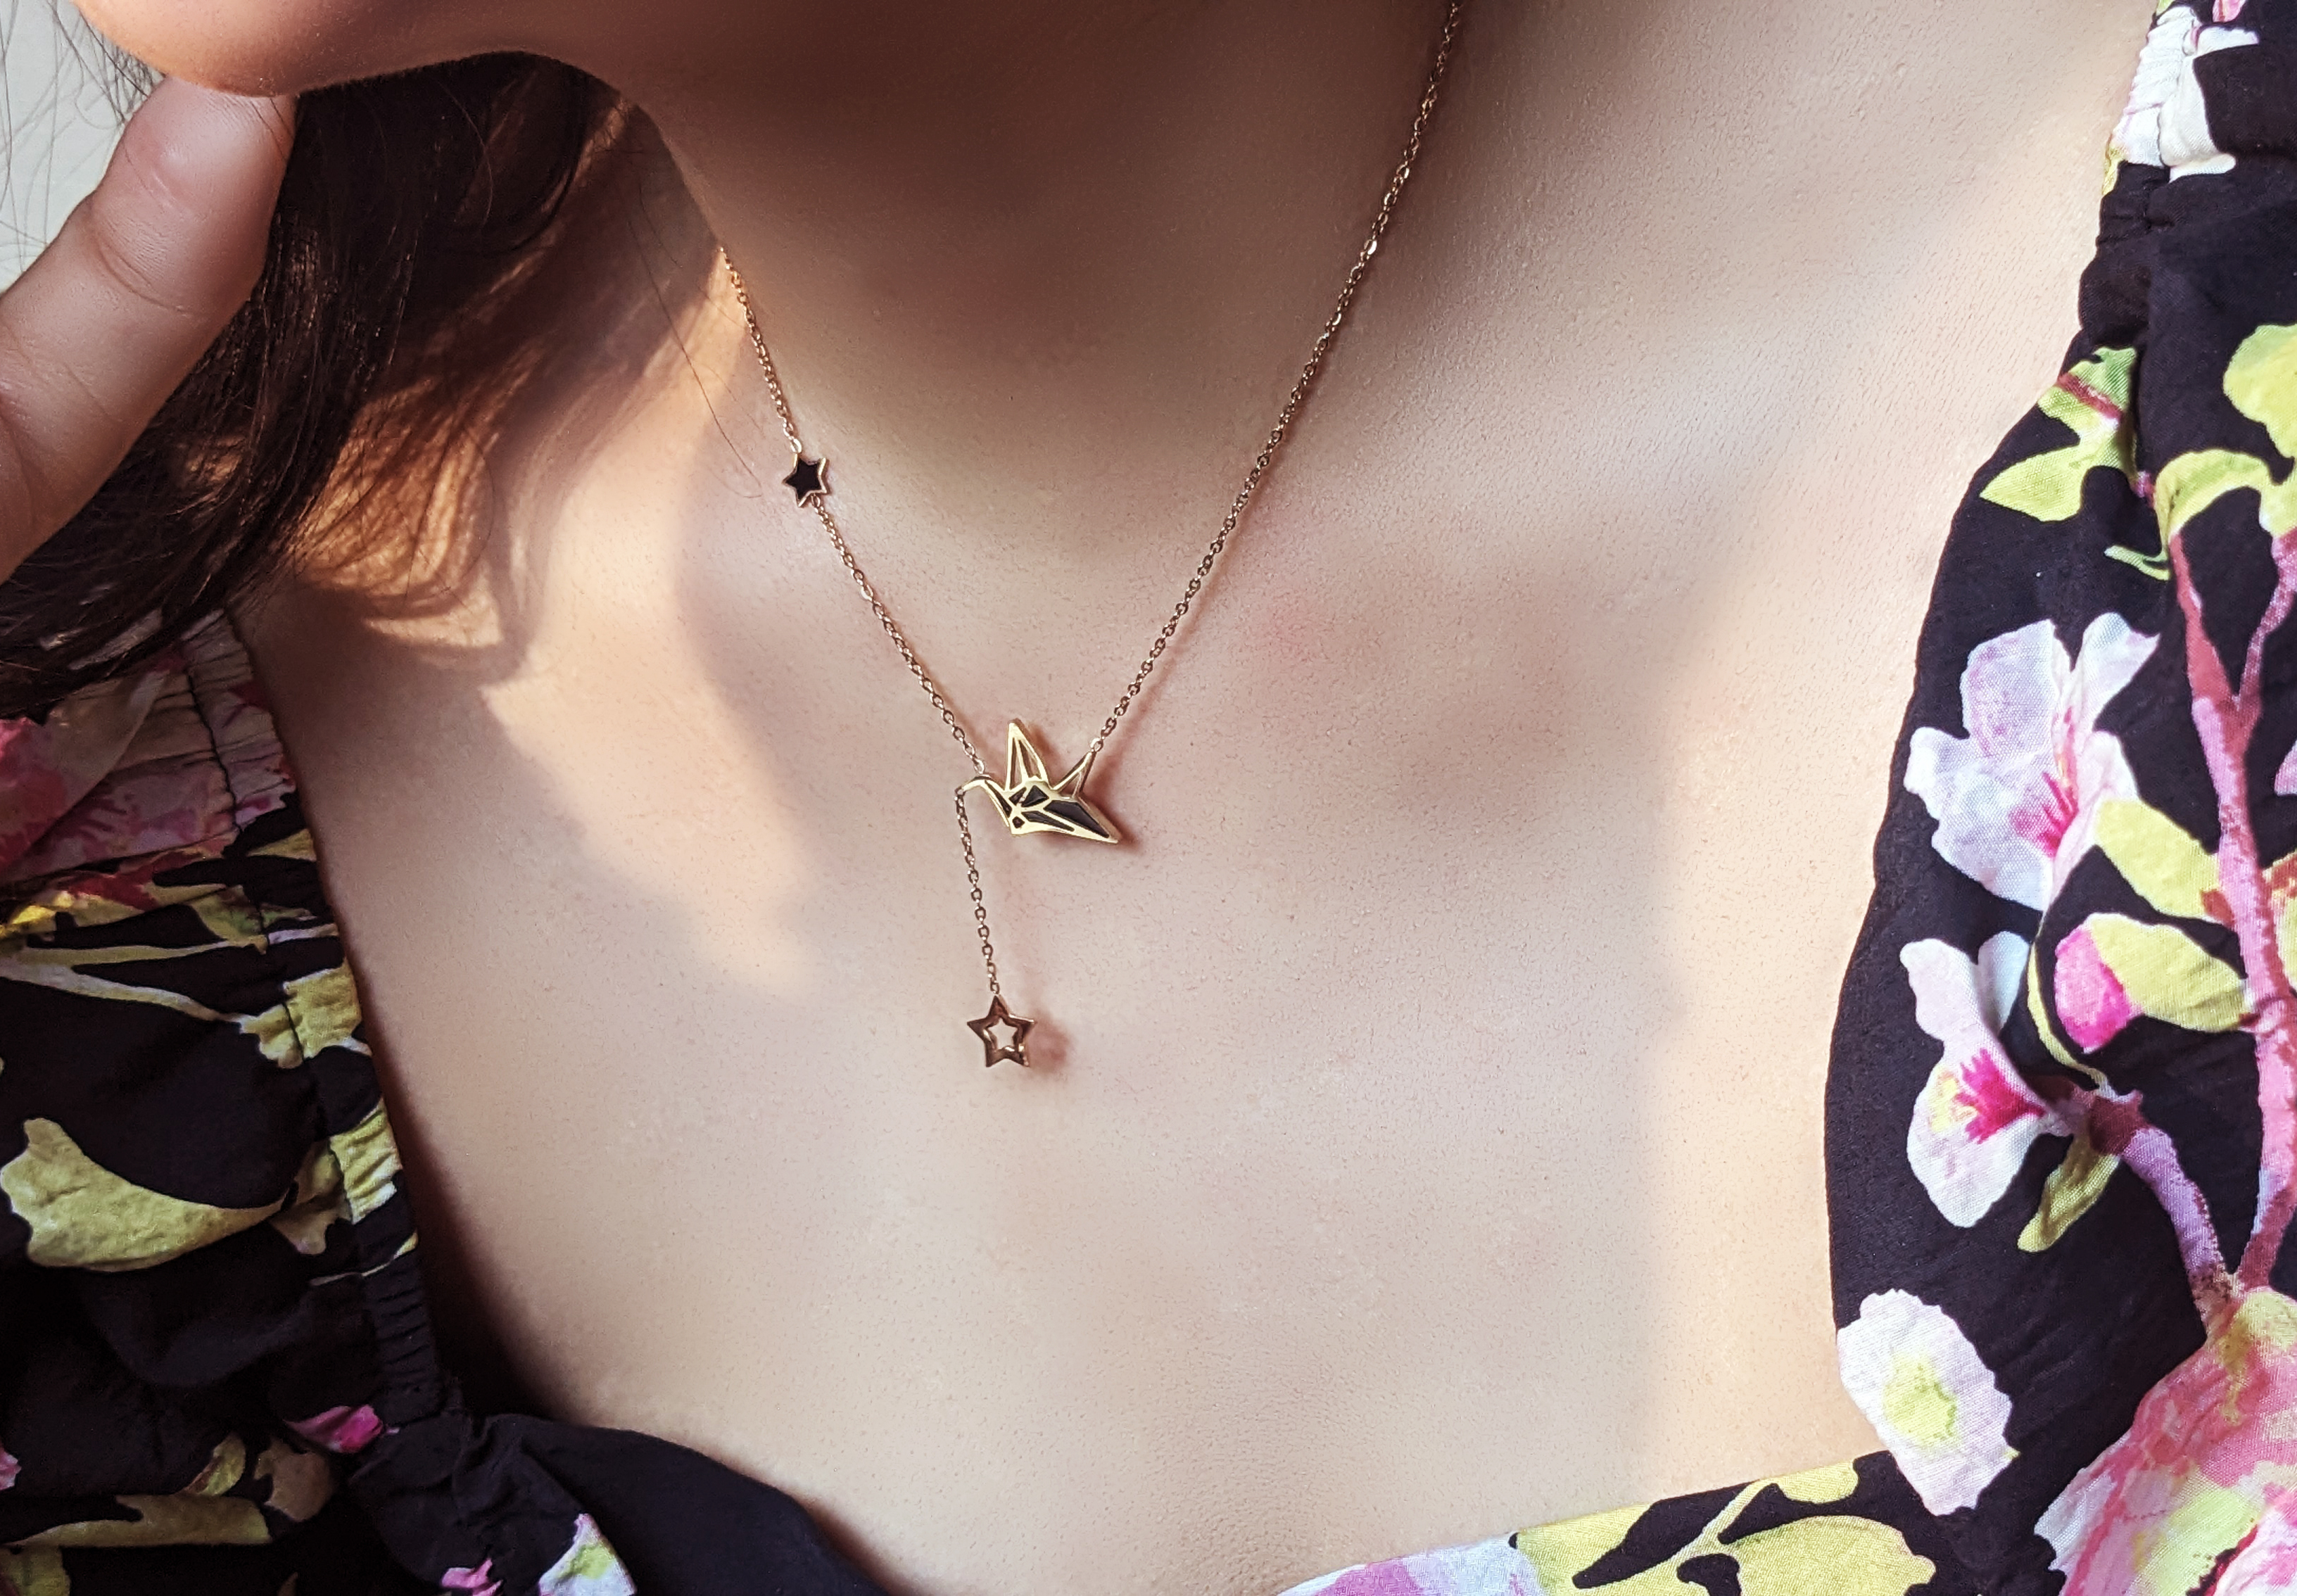 Origami necklace 18k Gold plated, delicate bird and star necklace, minimalist necklace